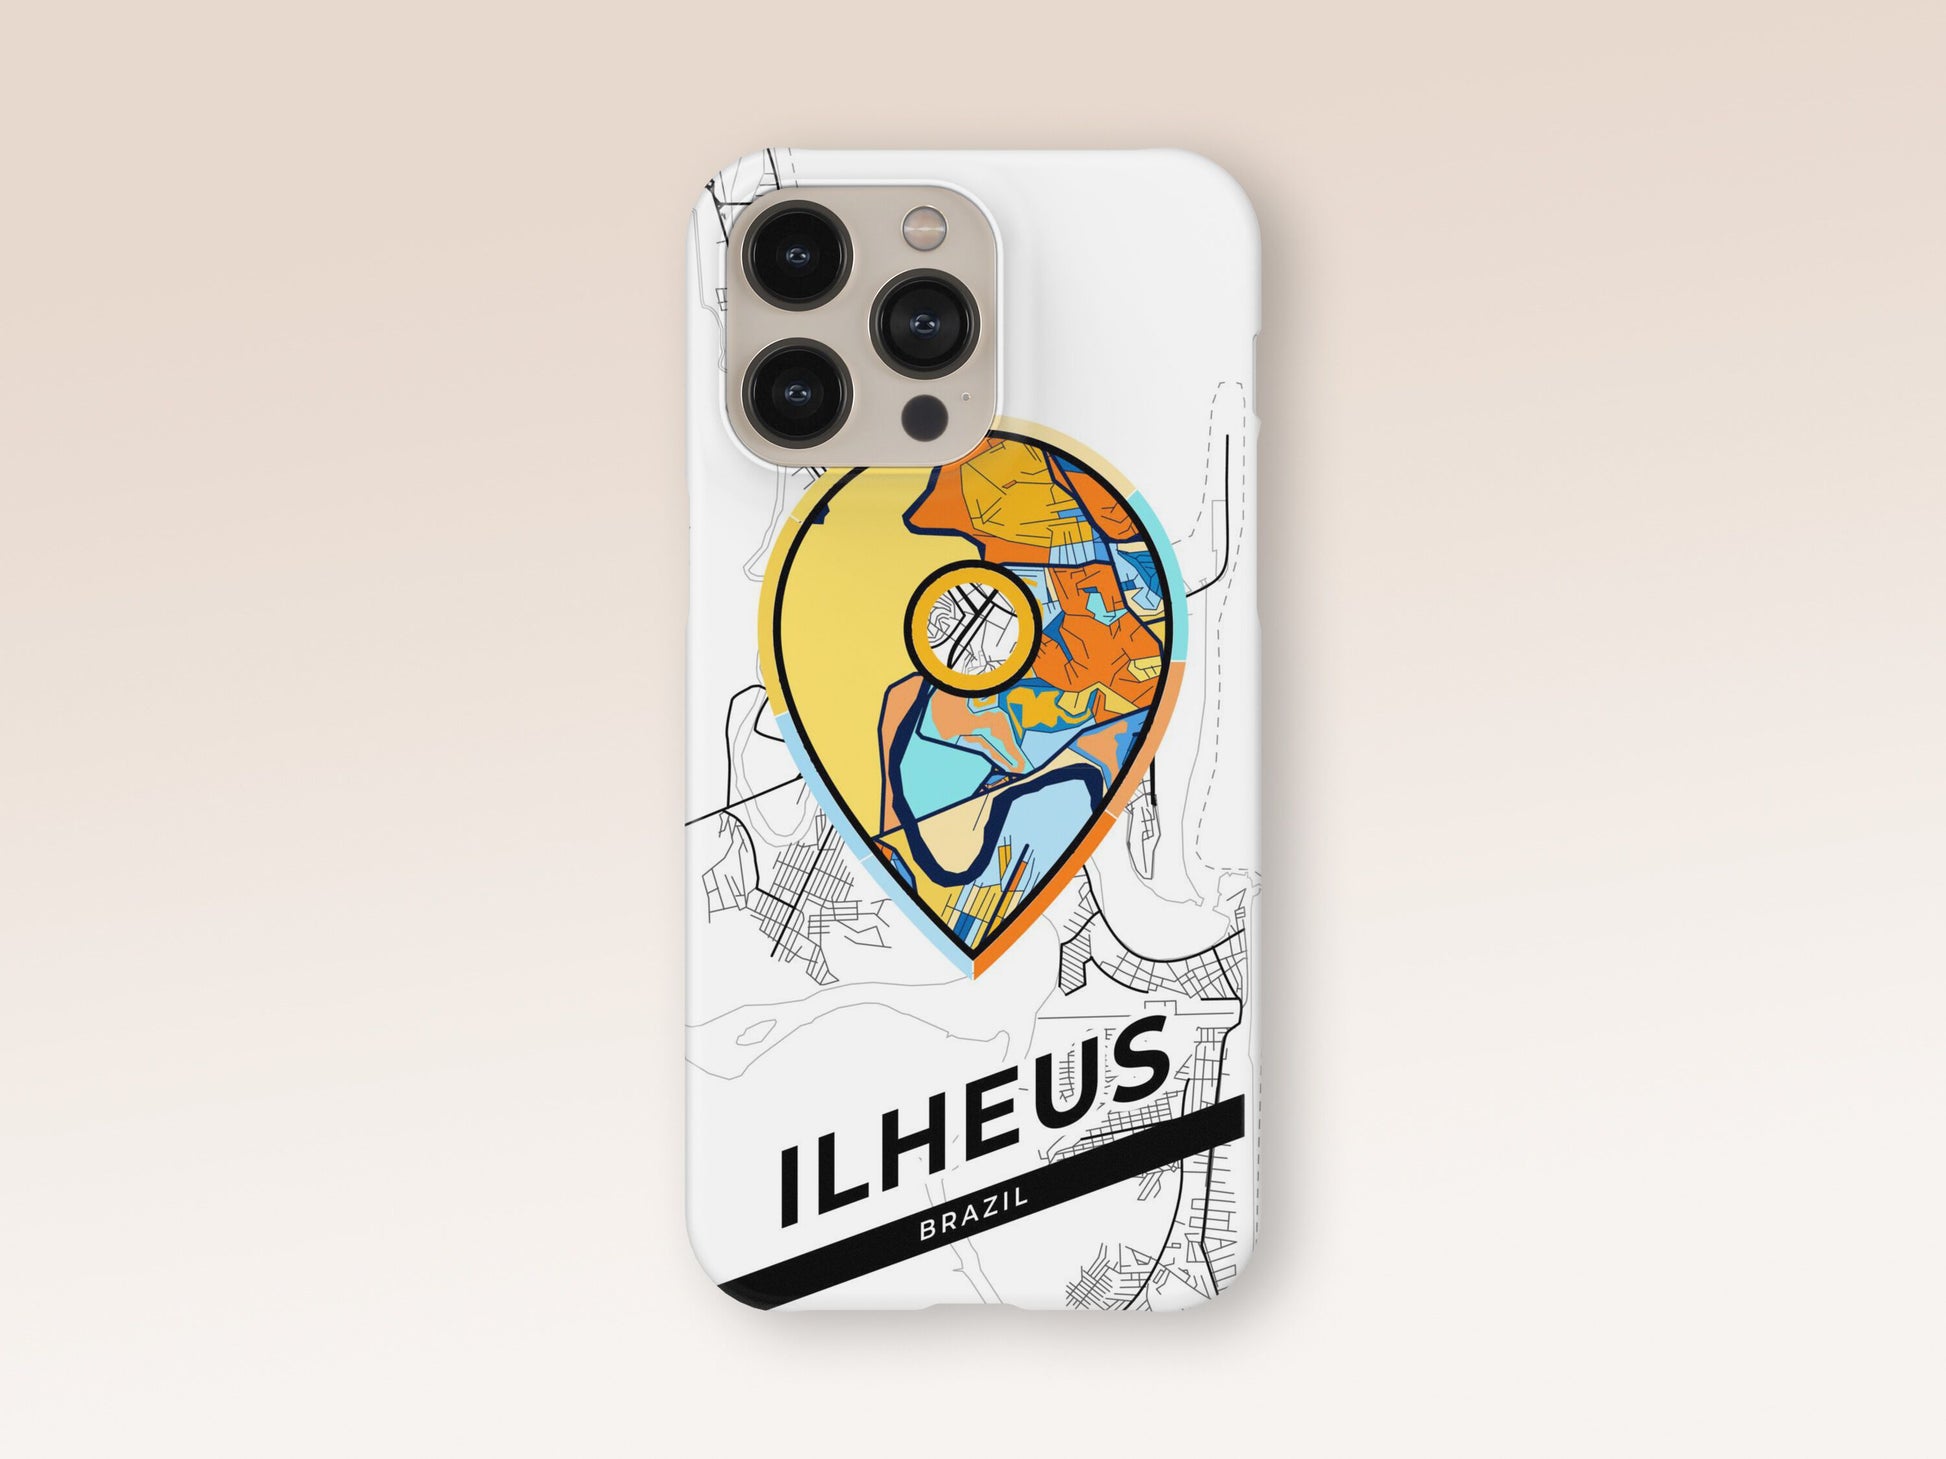 Ilheus Brazil slim phone case with colorful icon. Birthday, wedding or housewarming gift. Couple match cases. 1